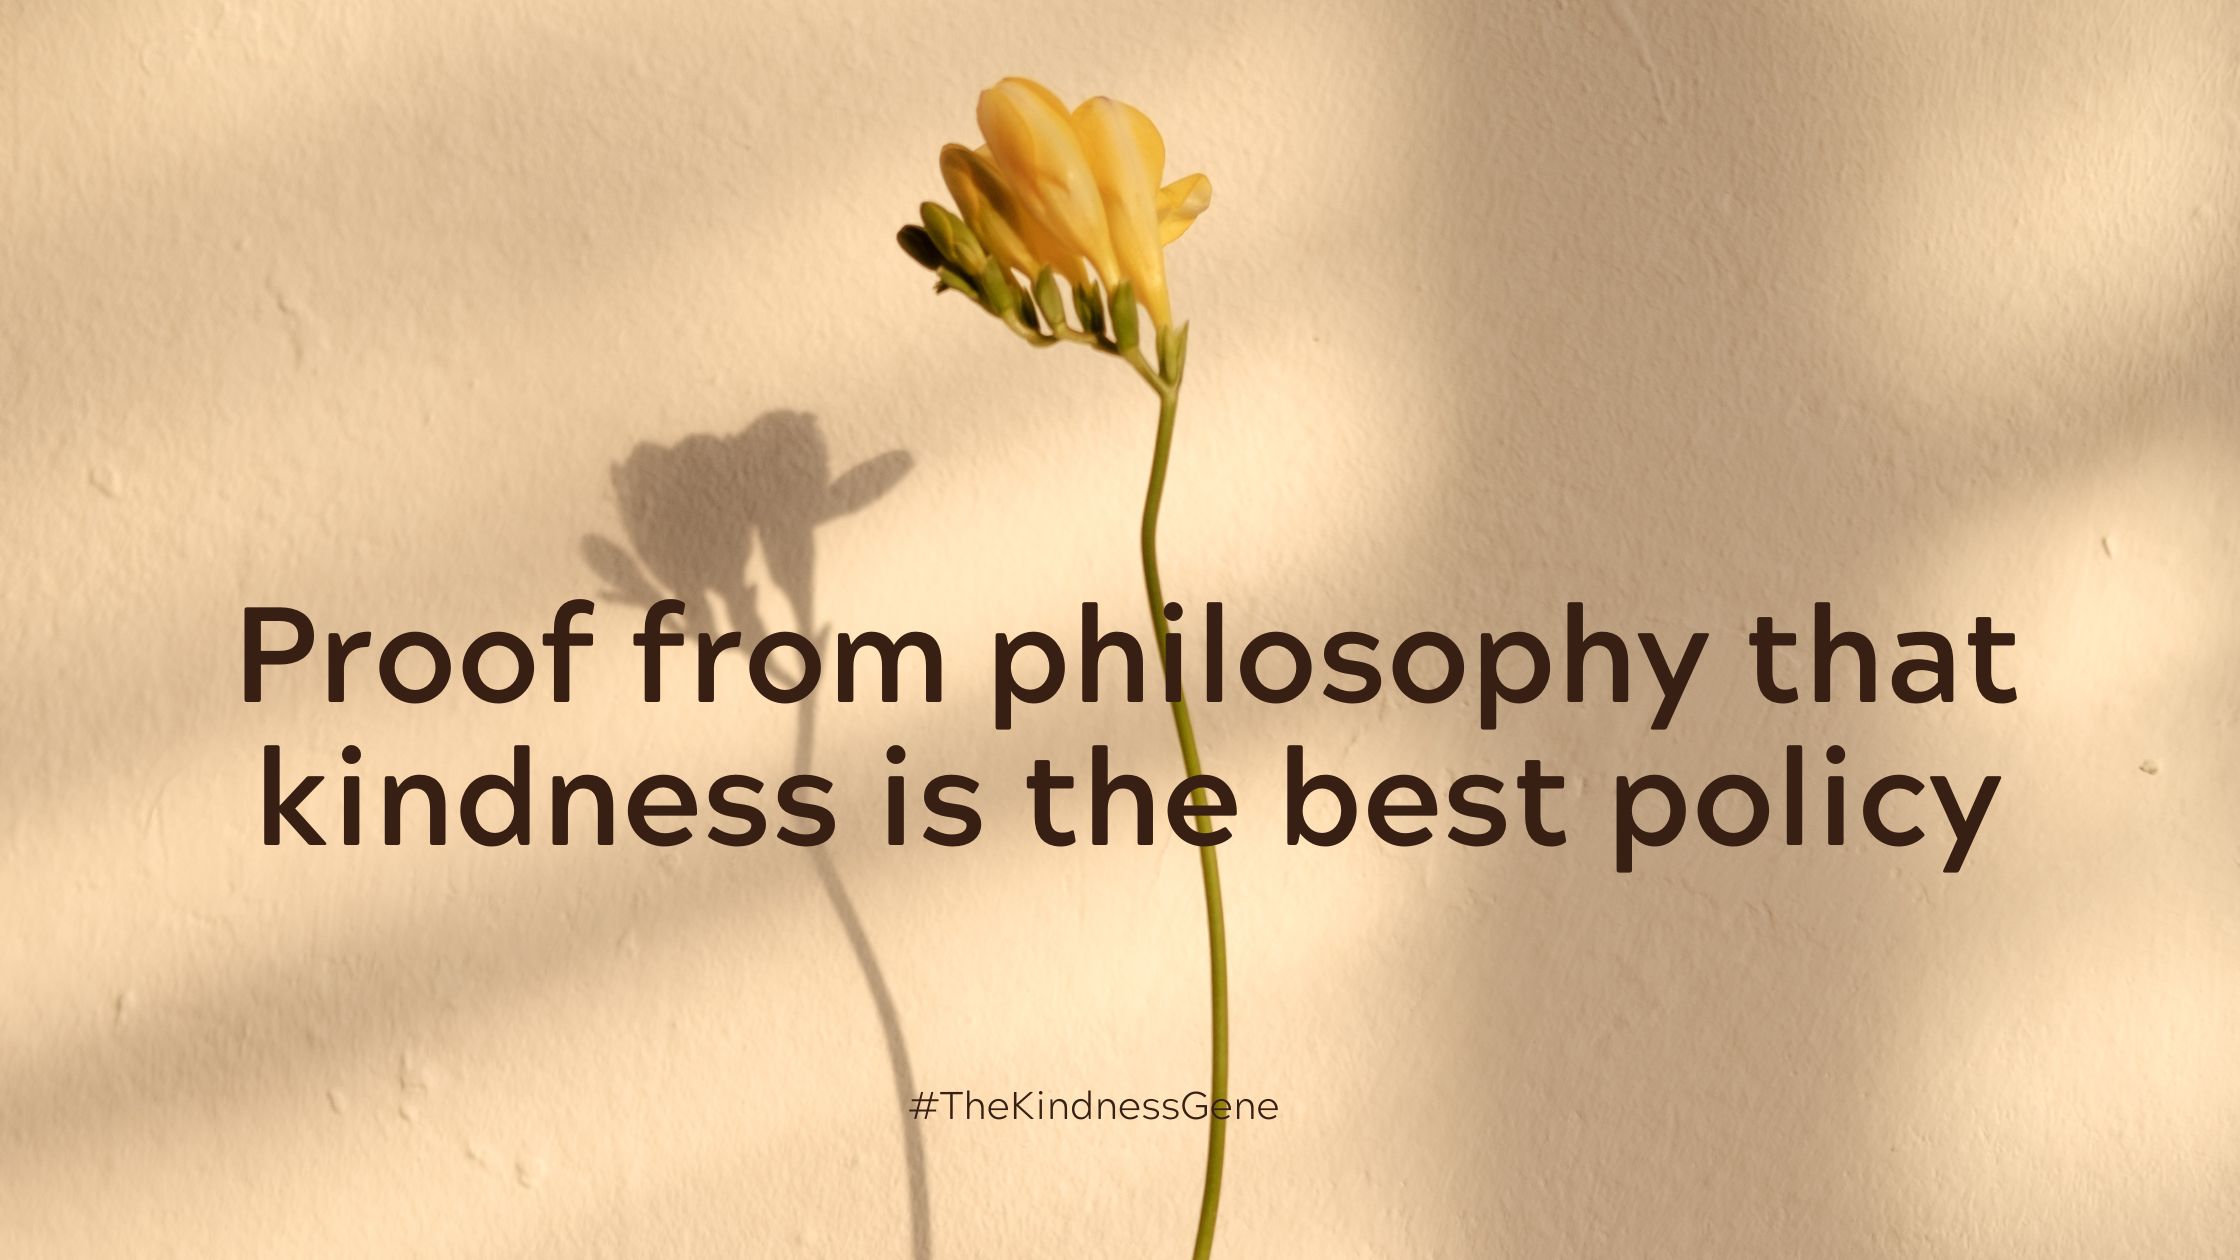 Proof from philosophy that kindness is the best policy